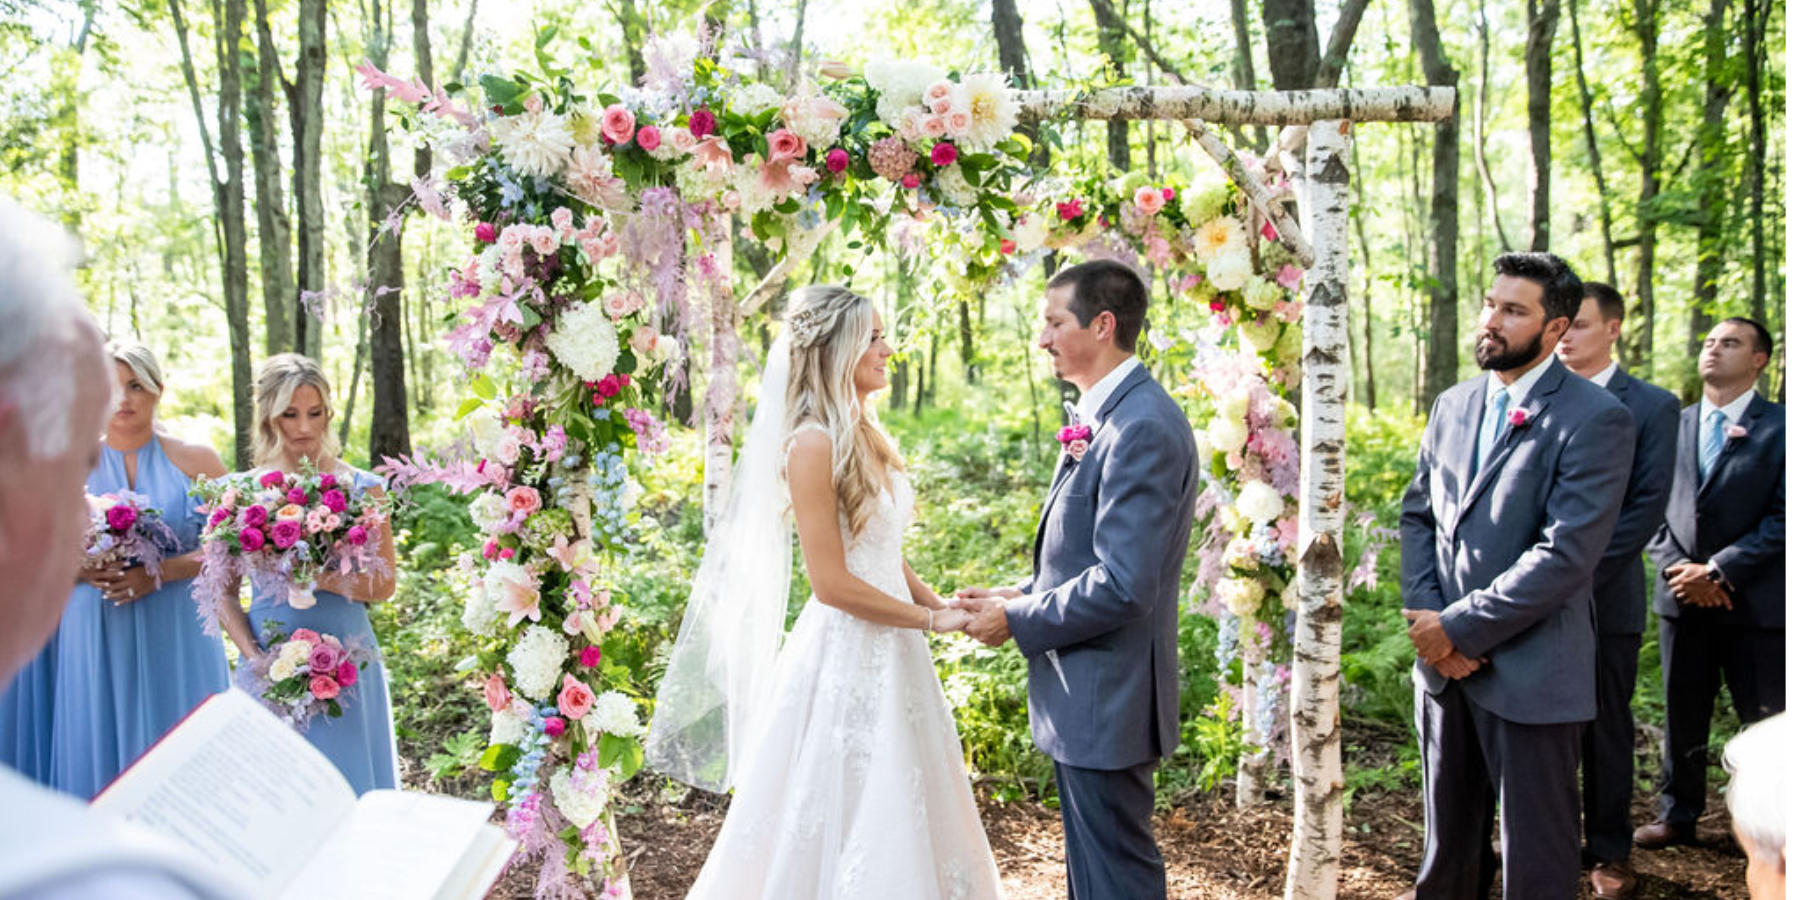 An altar for a wedding in the woods, the couple is standing under a stunning arbor with colorful and beautiful flowers